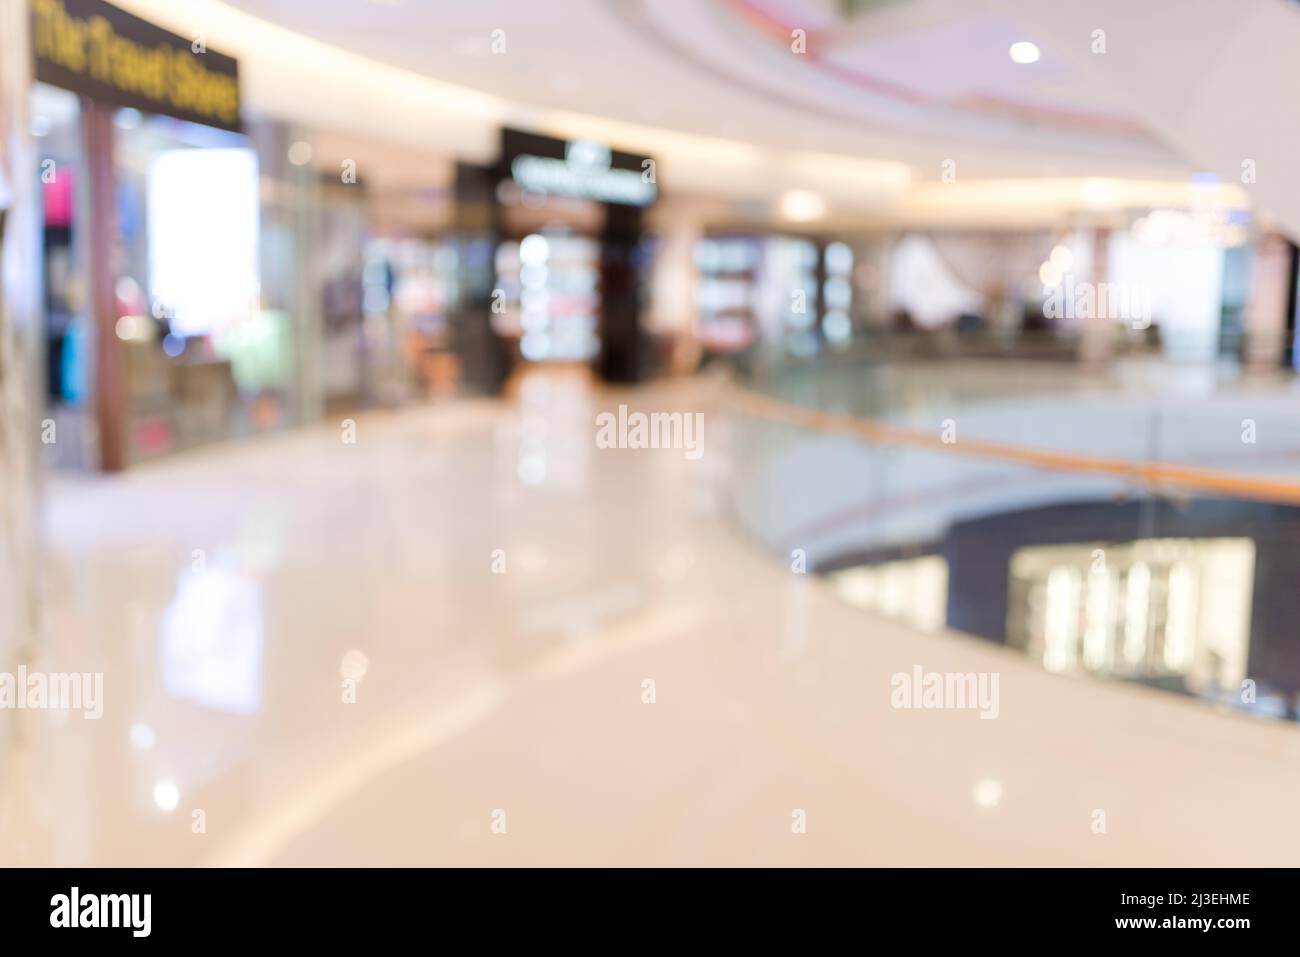 Internal view of the Crescent Mall shopping center Stock Photo